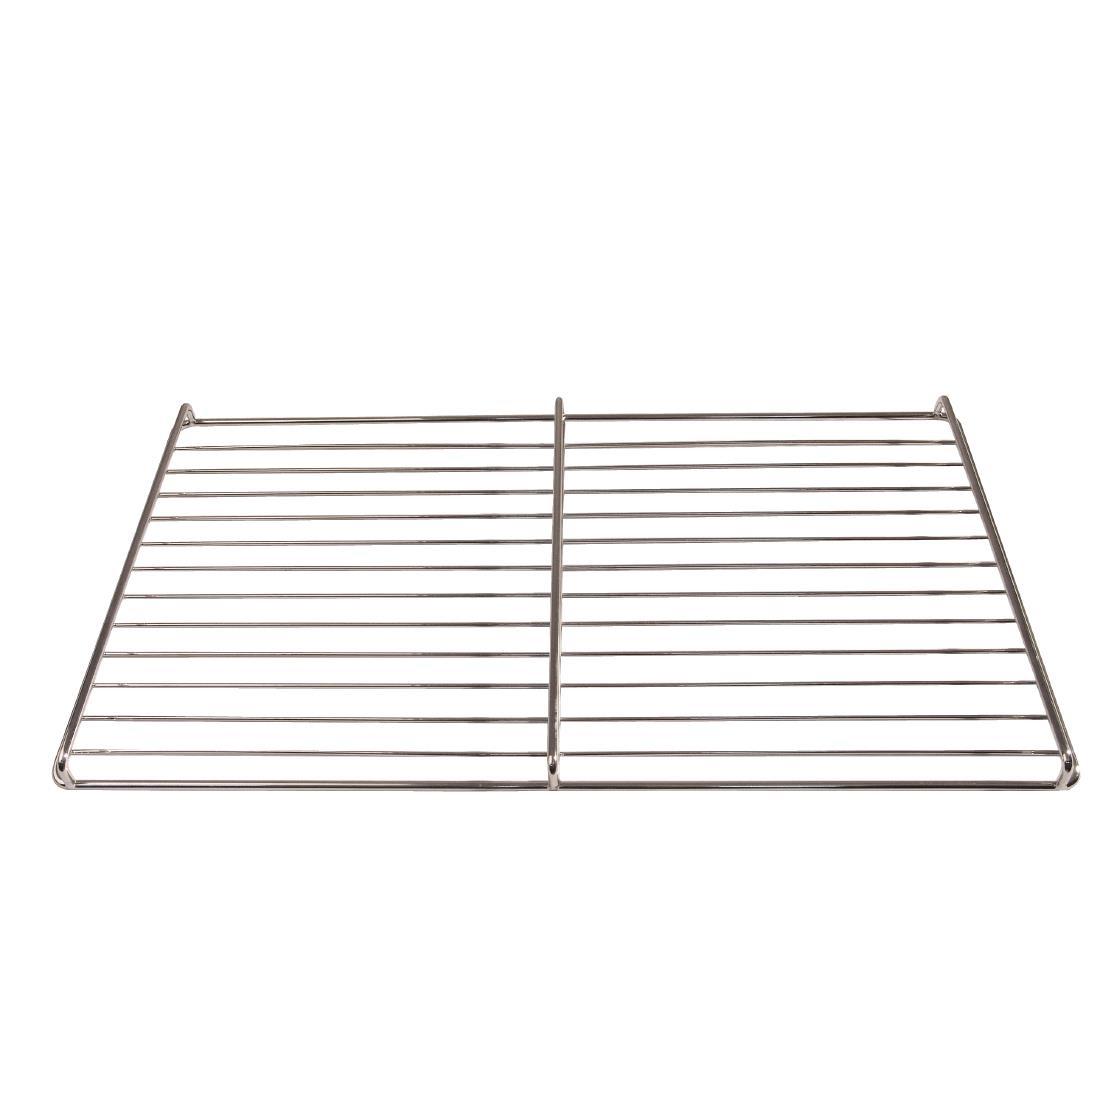 Grilling Rack - AD797  - 1